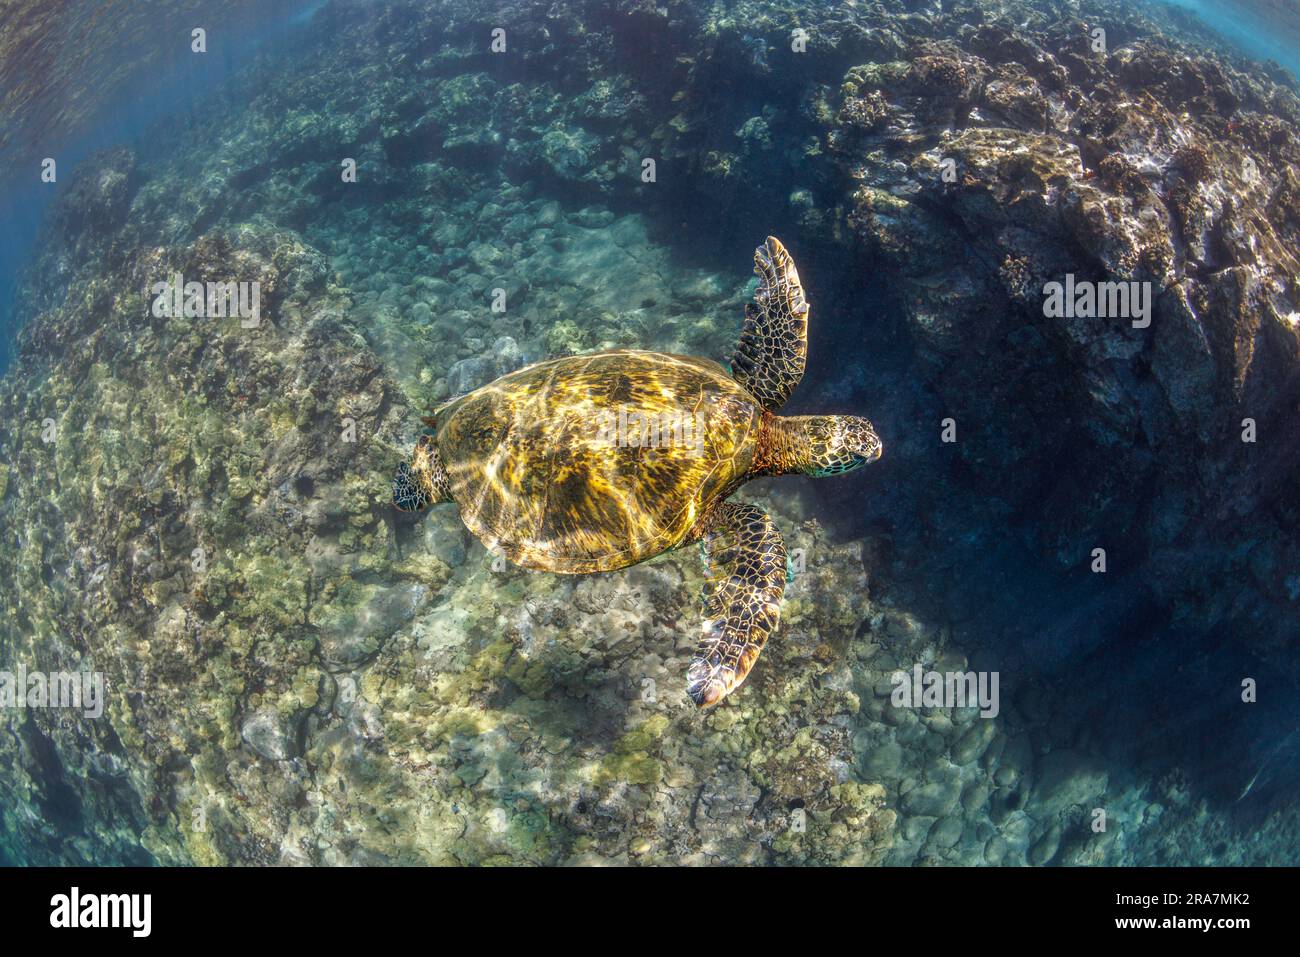 A green sea turtle, Chelonia mydas, an endangered species, glides over coral encrusted lava formations off Maui, Hawaii. Stock Photo